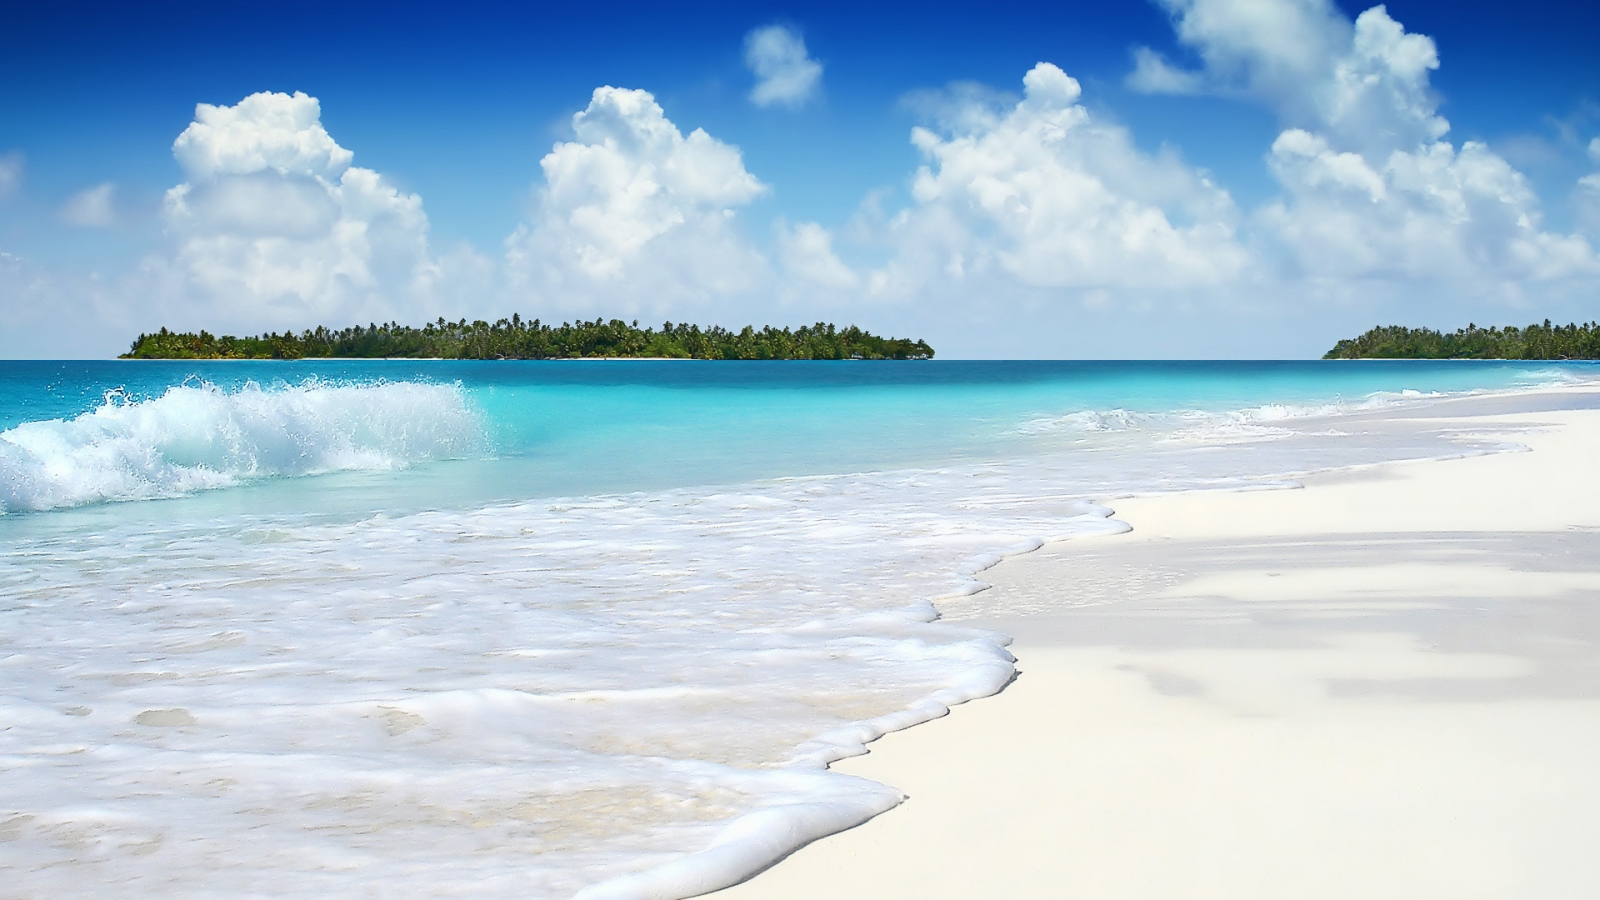 The Beautiful Summer Island for 1600 x 900 HDTV resolution